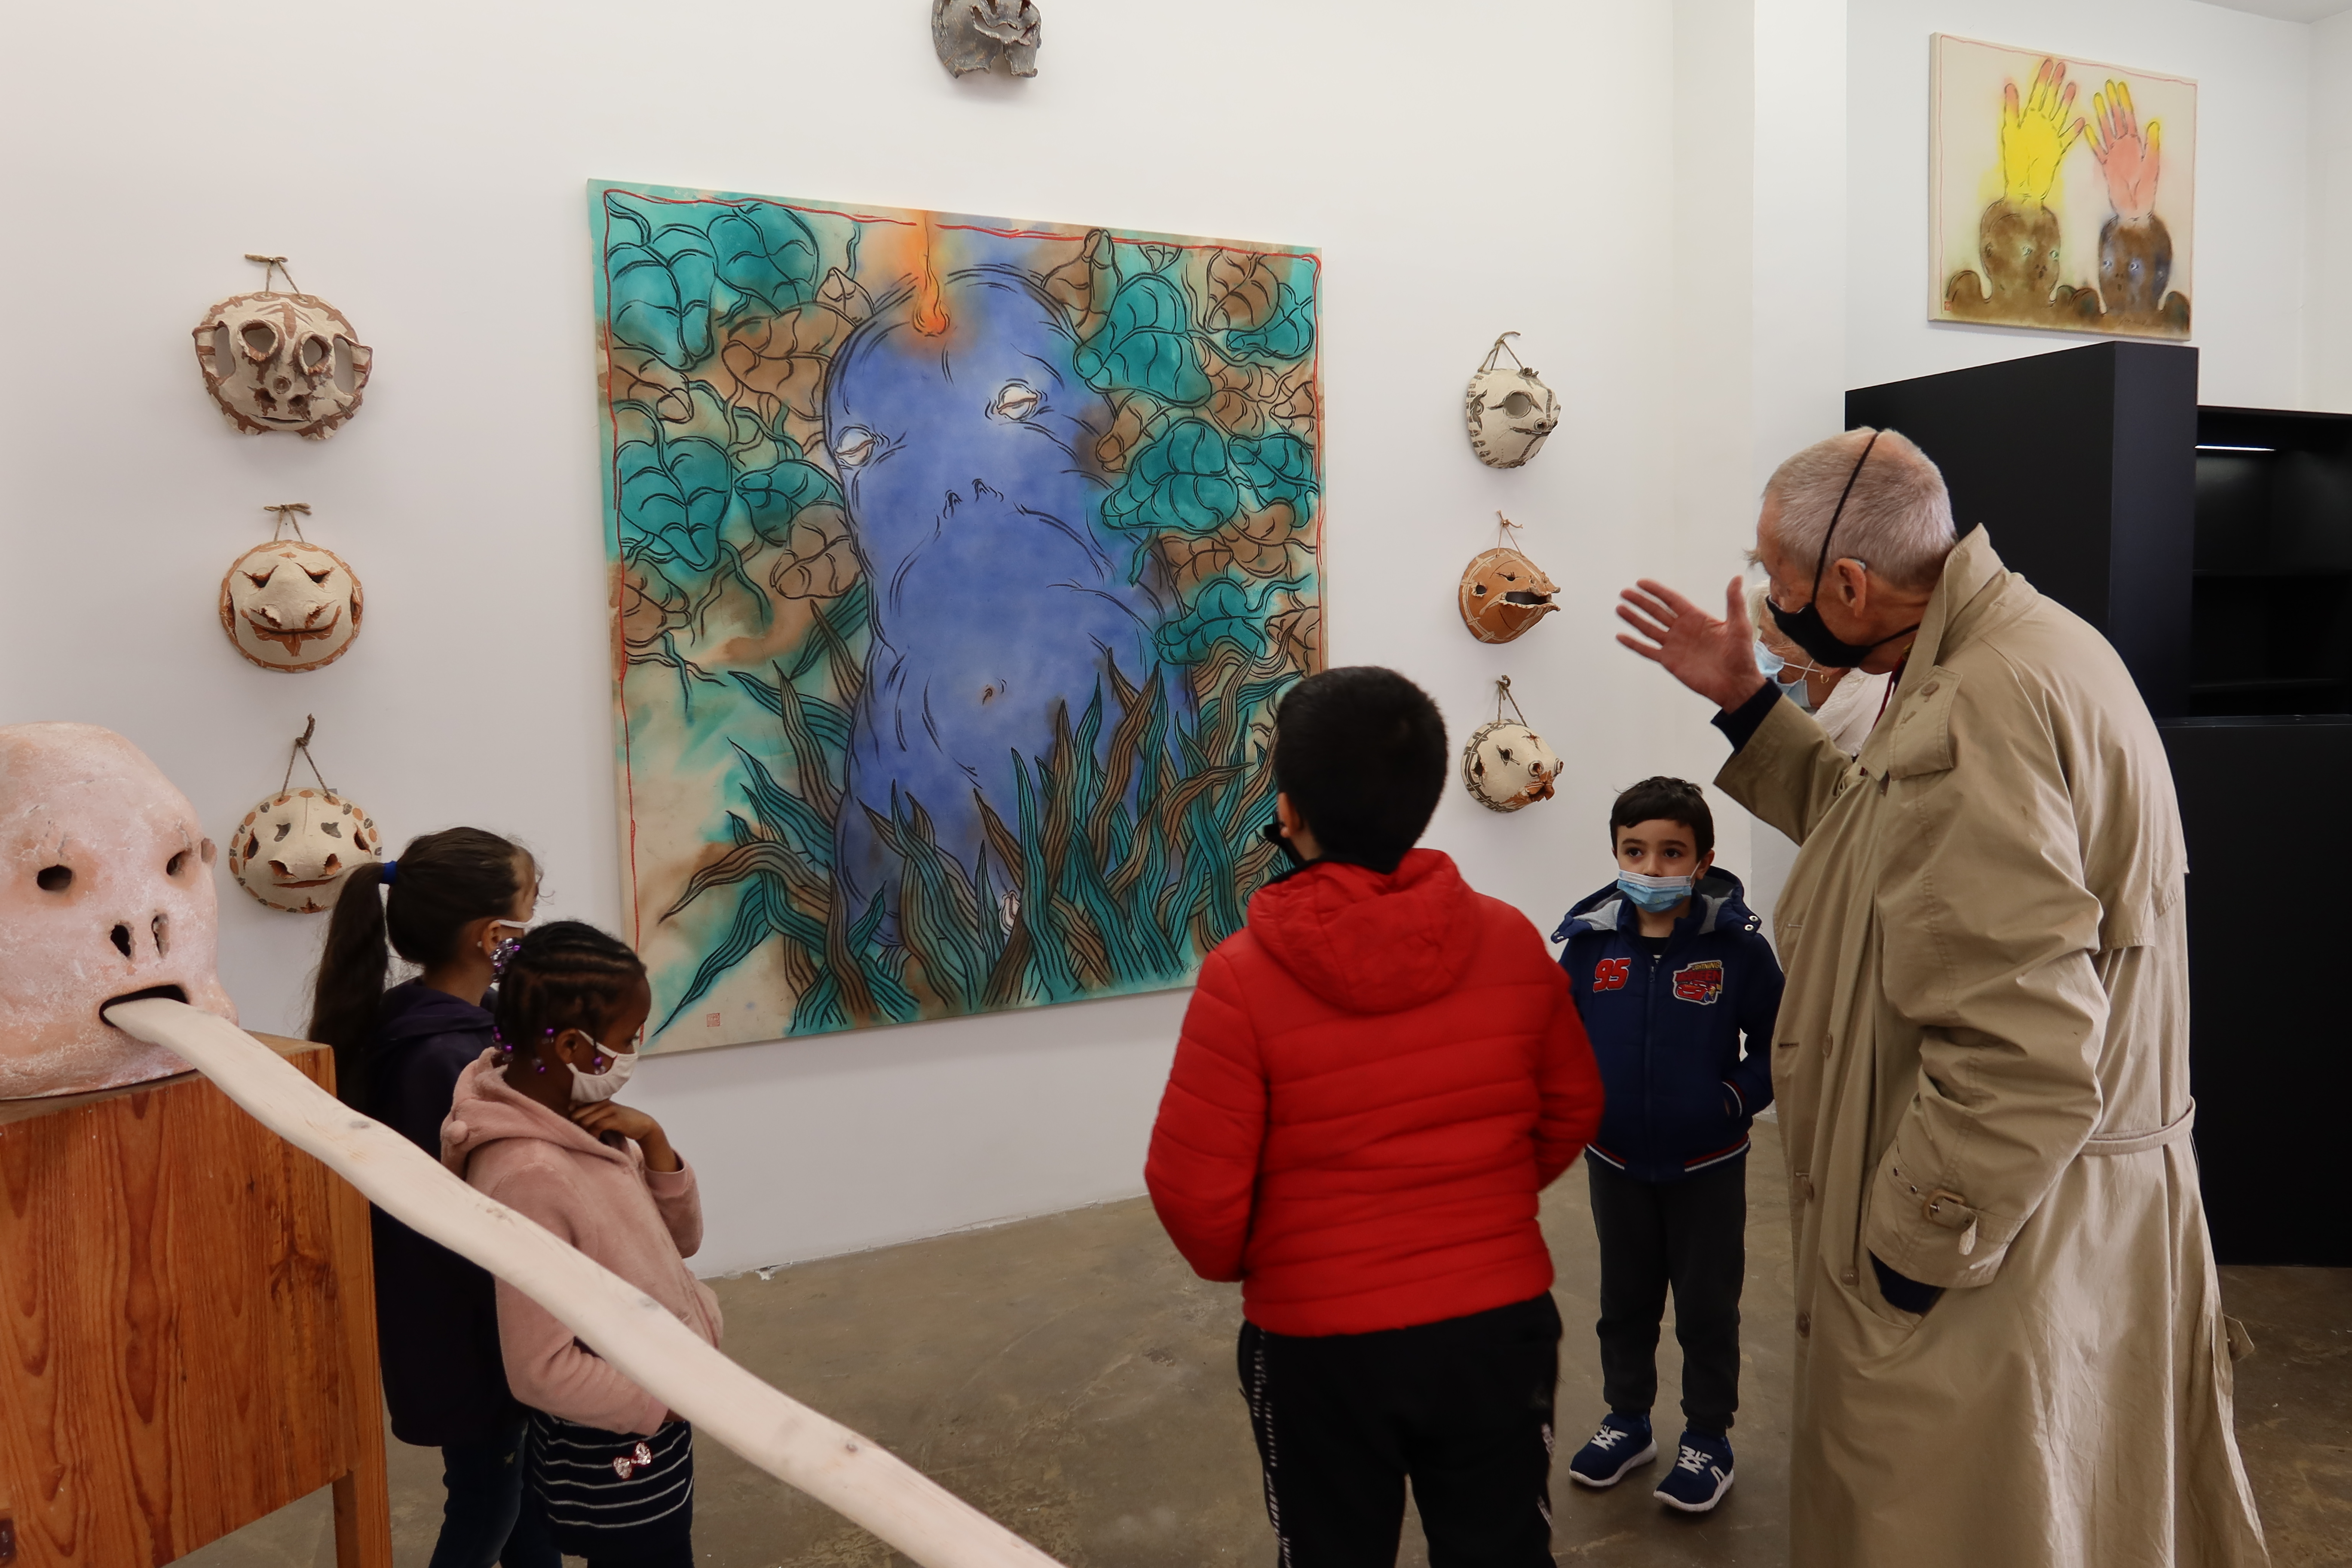 The artist, Mark Bruss, takes a guided tour of his children’s exhibition.